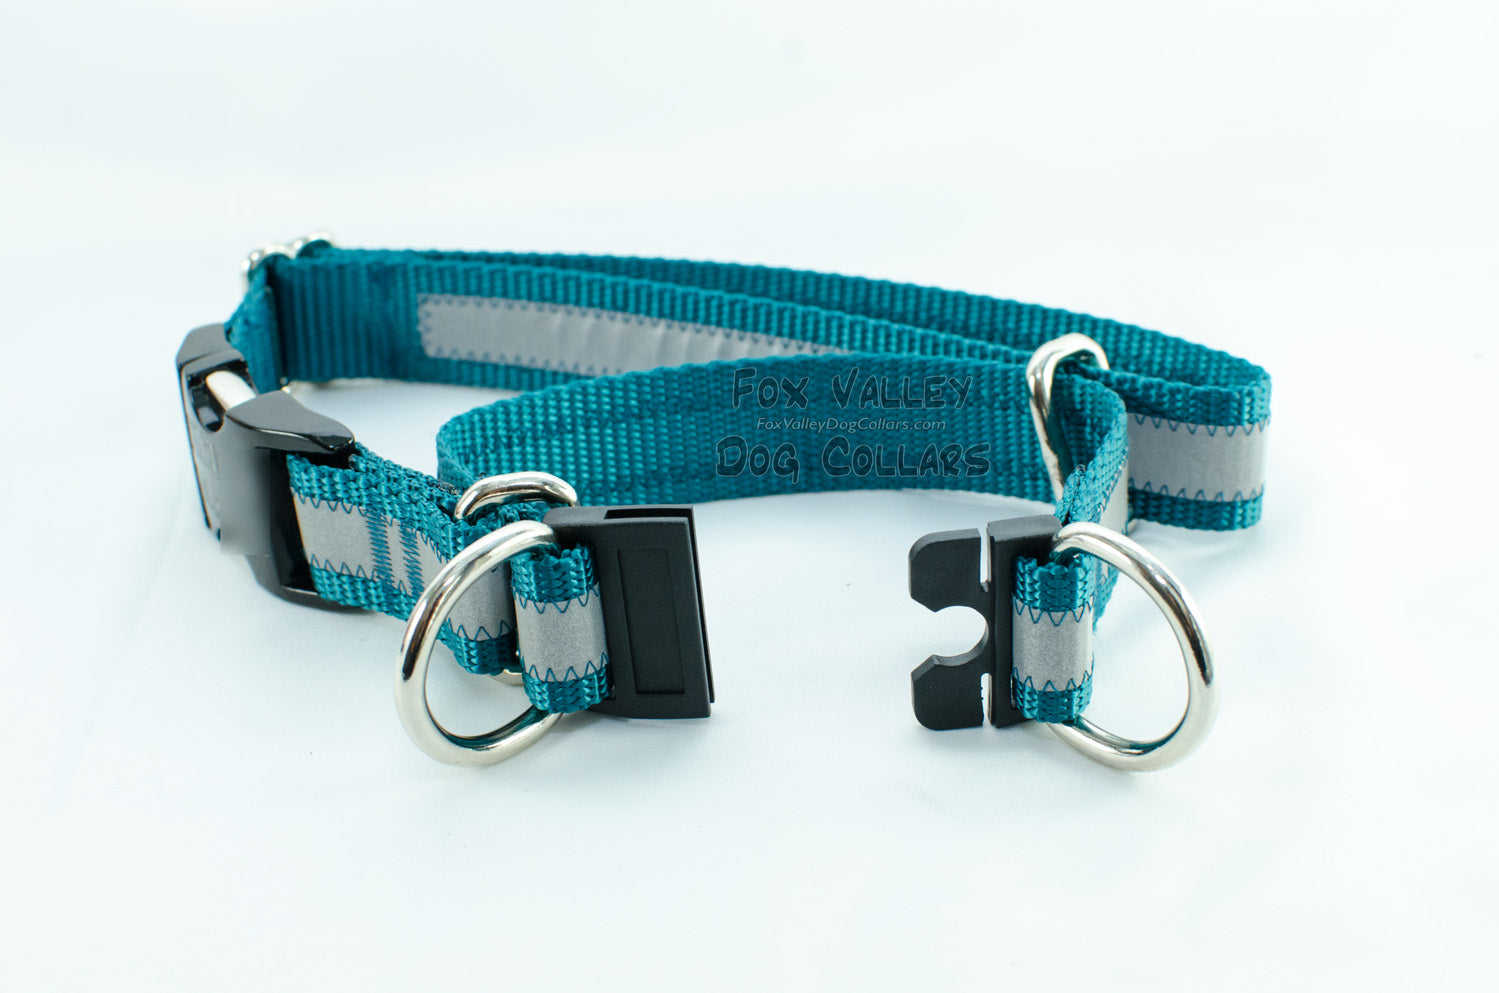 Martingale Dog Collar, Solid or Reflective